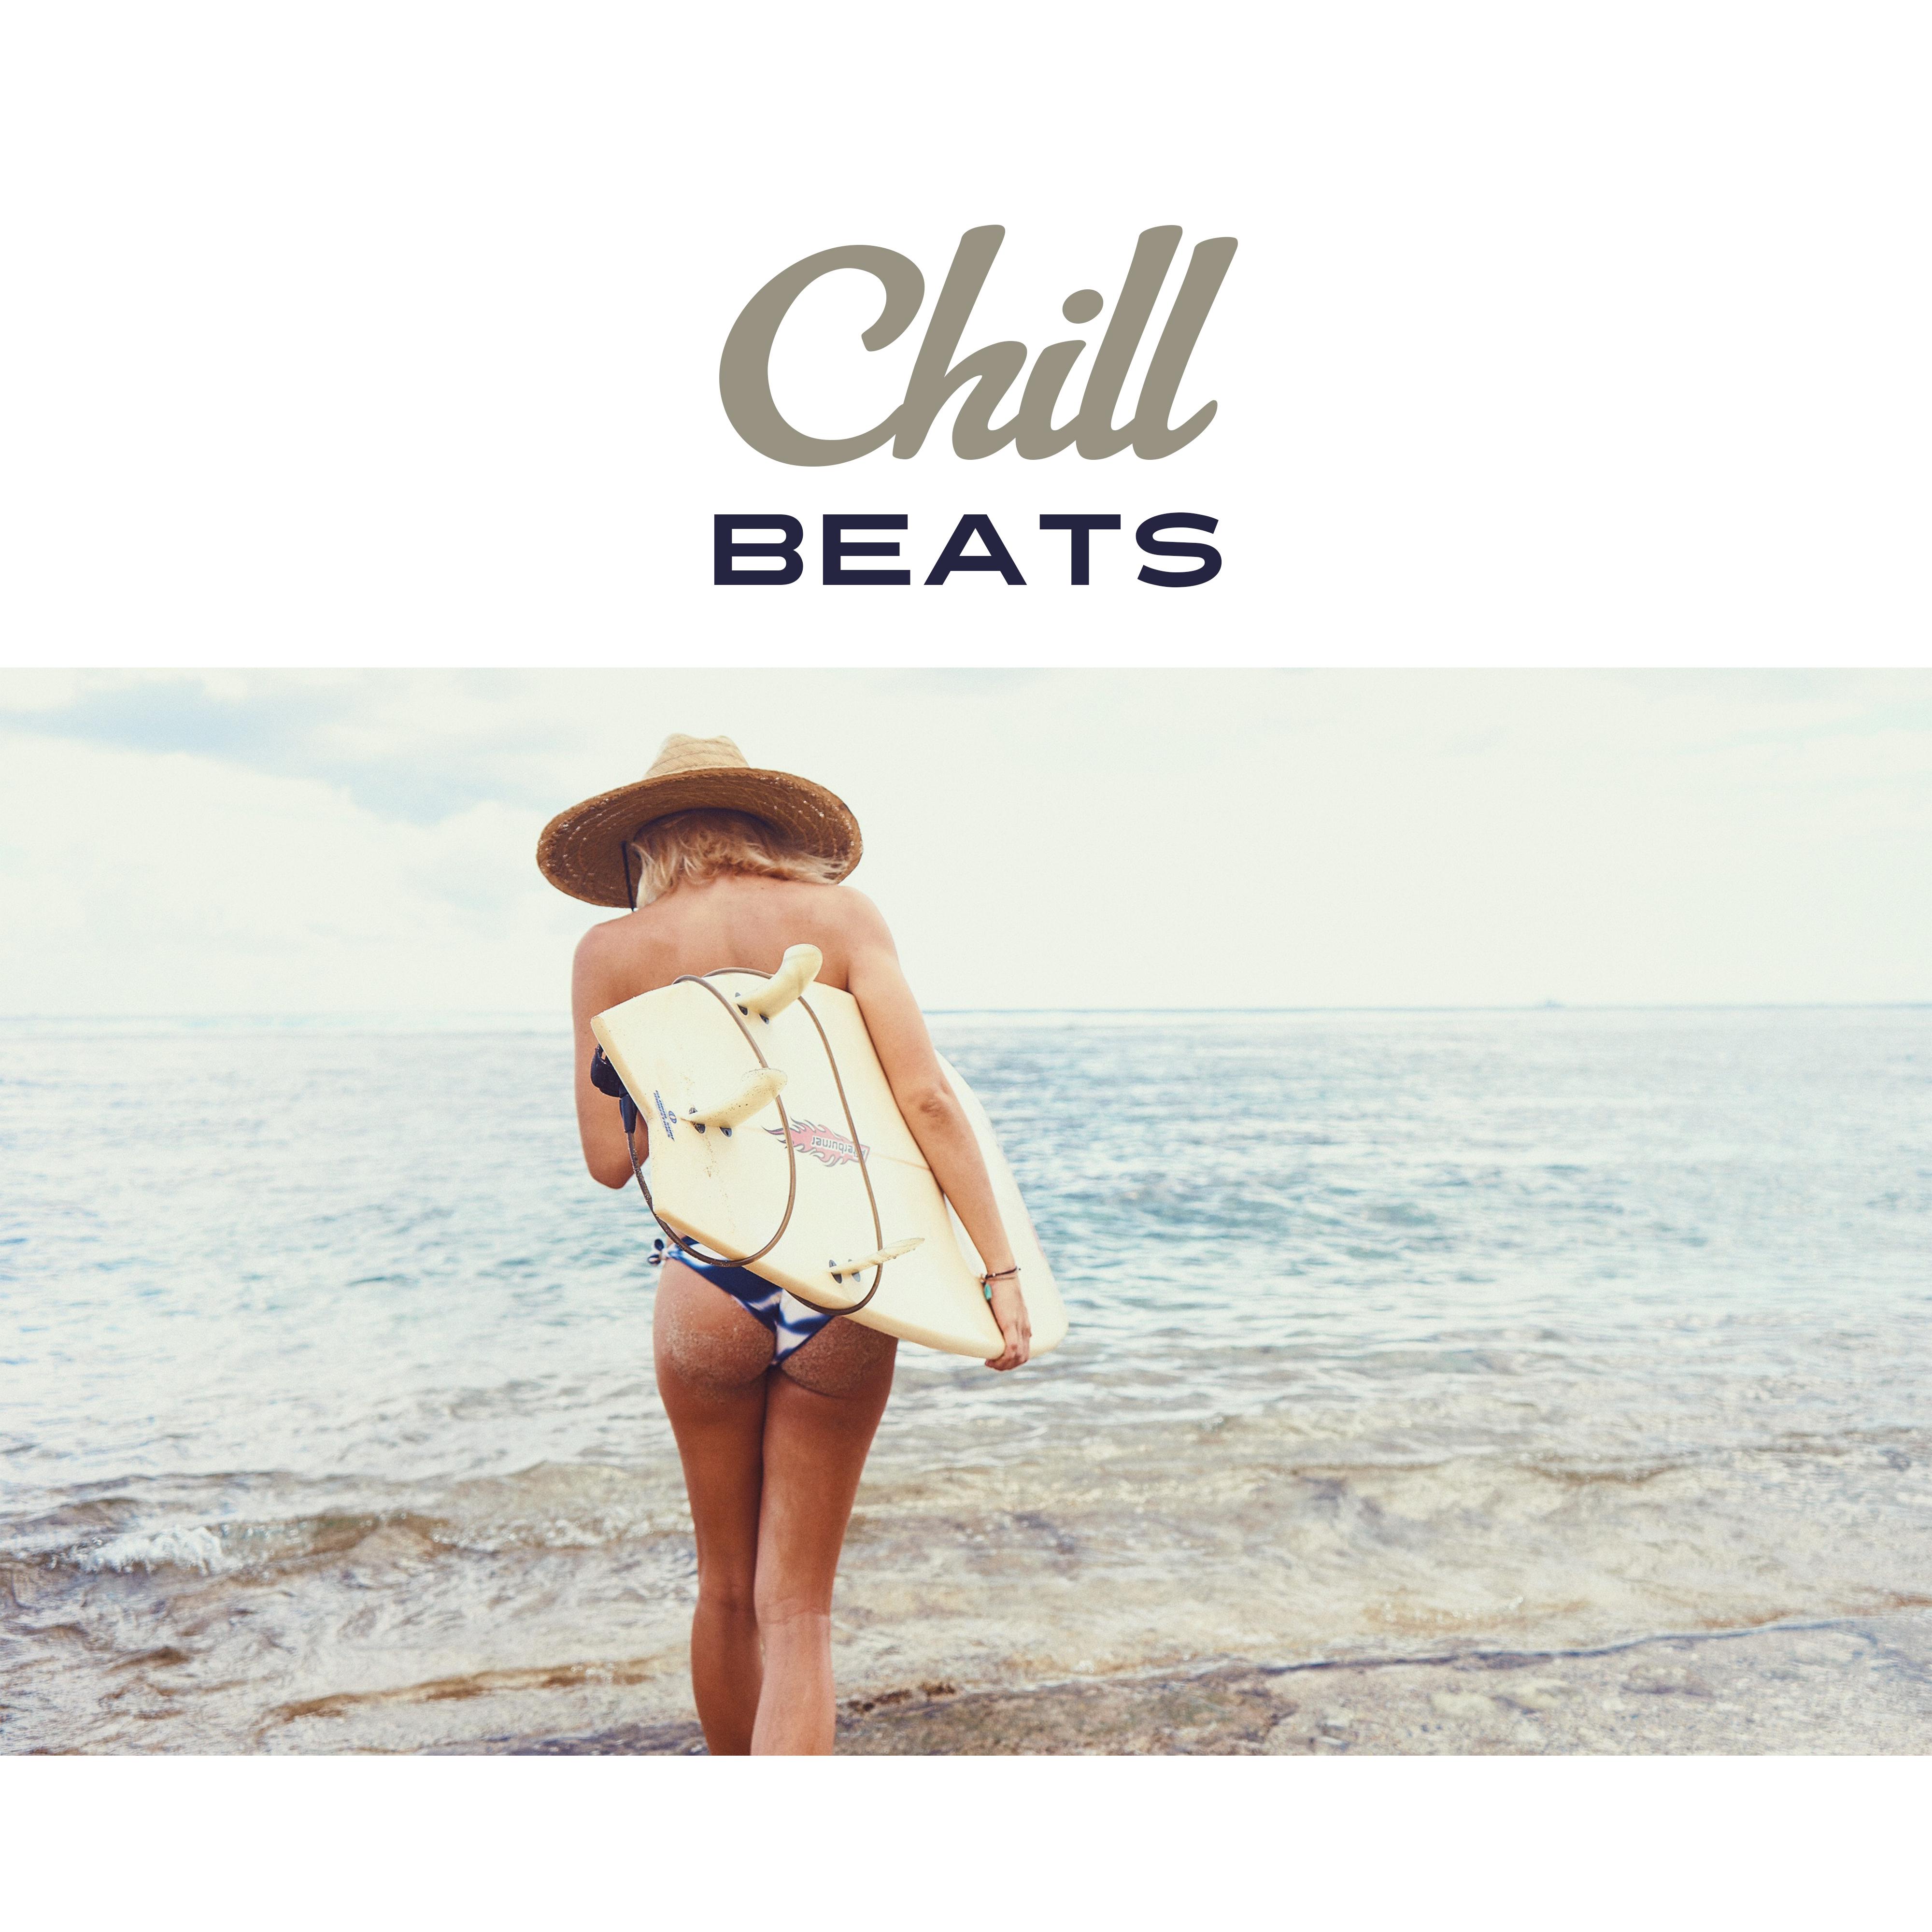 Chill Beats  Ibiza Dance Party, Beach Chill, Pure Relaxation, Calm Down, Ibiza Lounge, Rest, Holiday Chill Out Music 2017